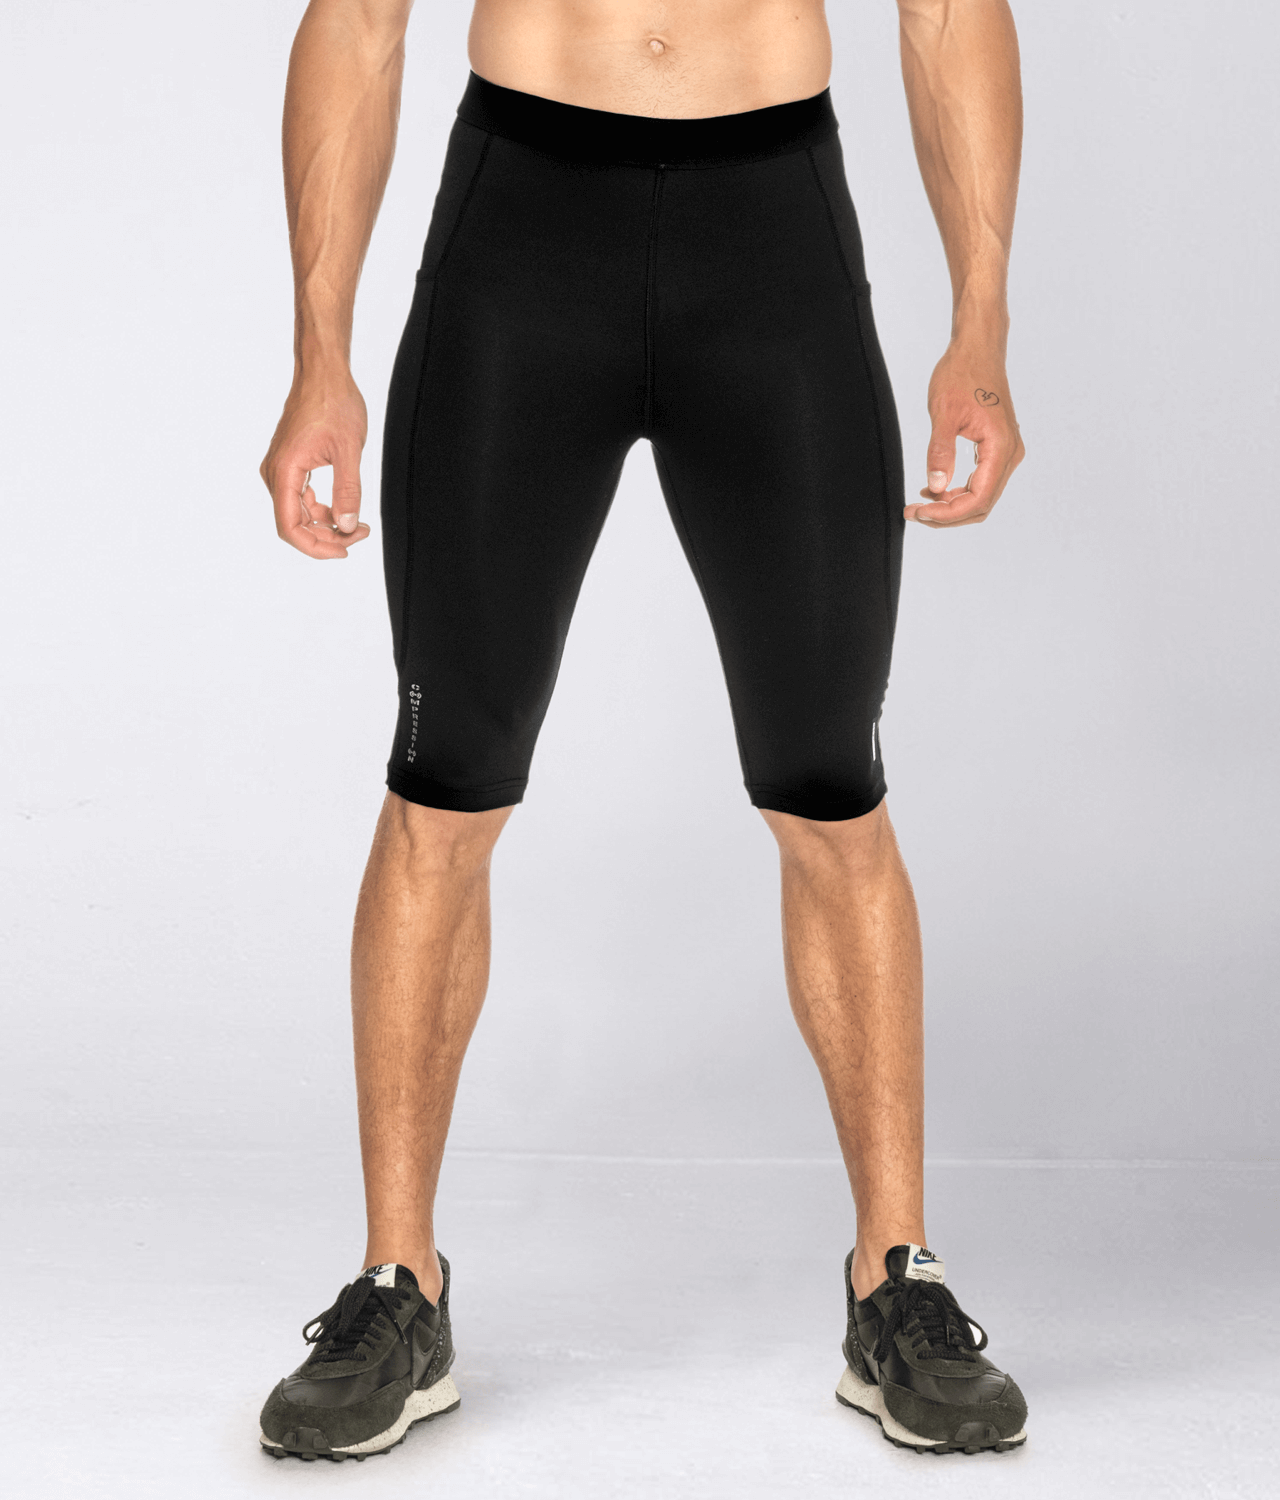 Amazon.com: WRAGCFM Men's 2 in 1 Running Pants Shorts Tights, Gym Workout  Compression Pants for Men Quick Dry Athletic Legging with Pocket(Black,S) :  Clothing, Shoes & Jewelry